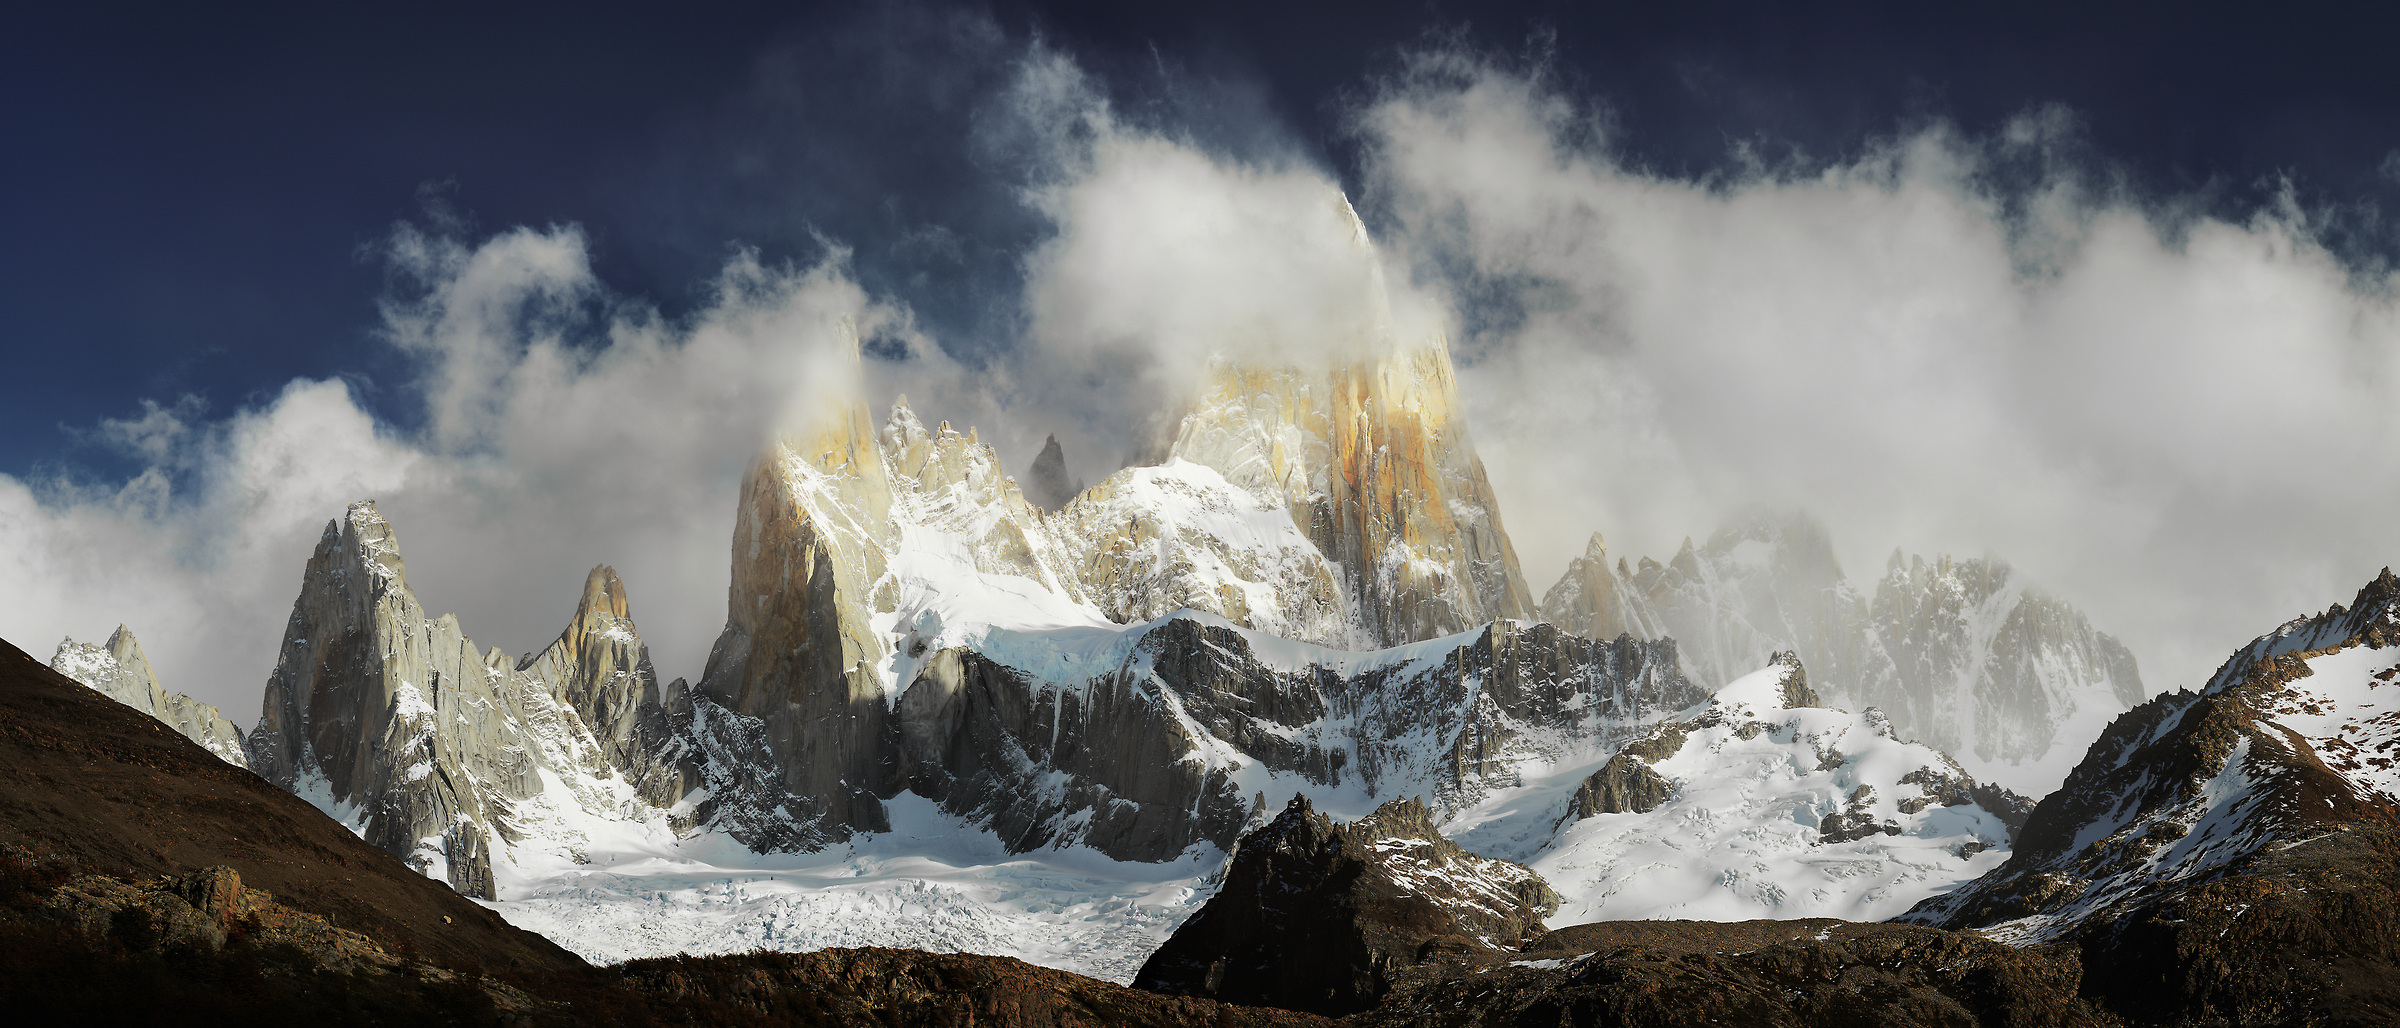 192 megapixels! A very high resolution, large-format VAST photo of a Patagonia mountain landscape; fine art print created by Alexandre Deschaumes in El chalten, Argentina, Patagonia.